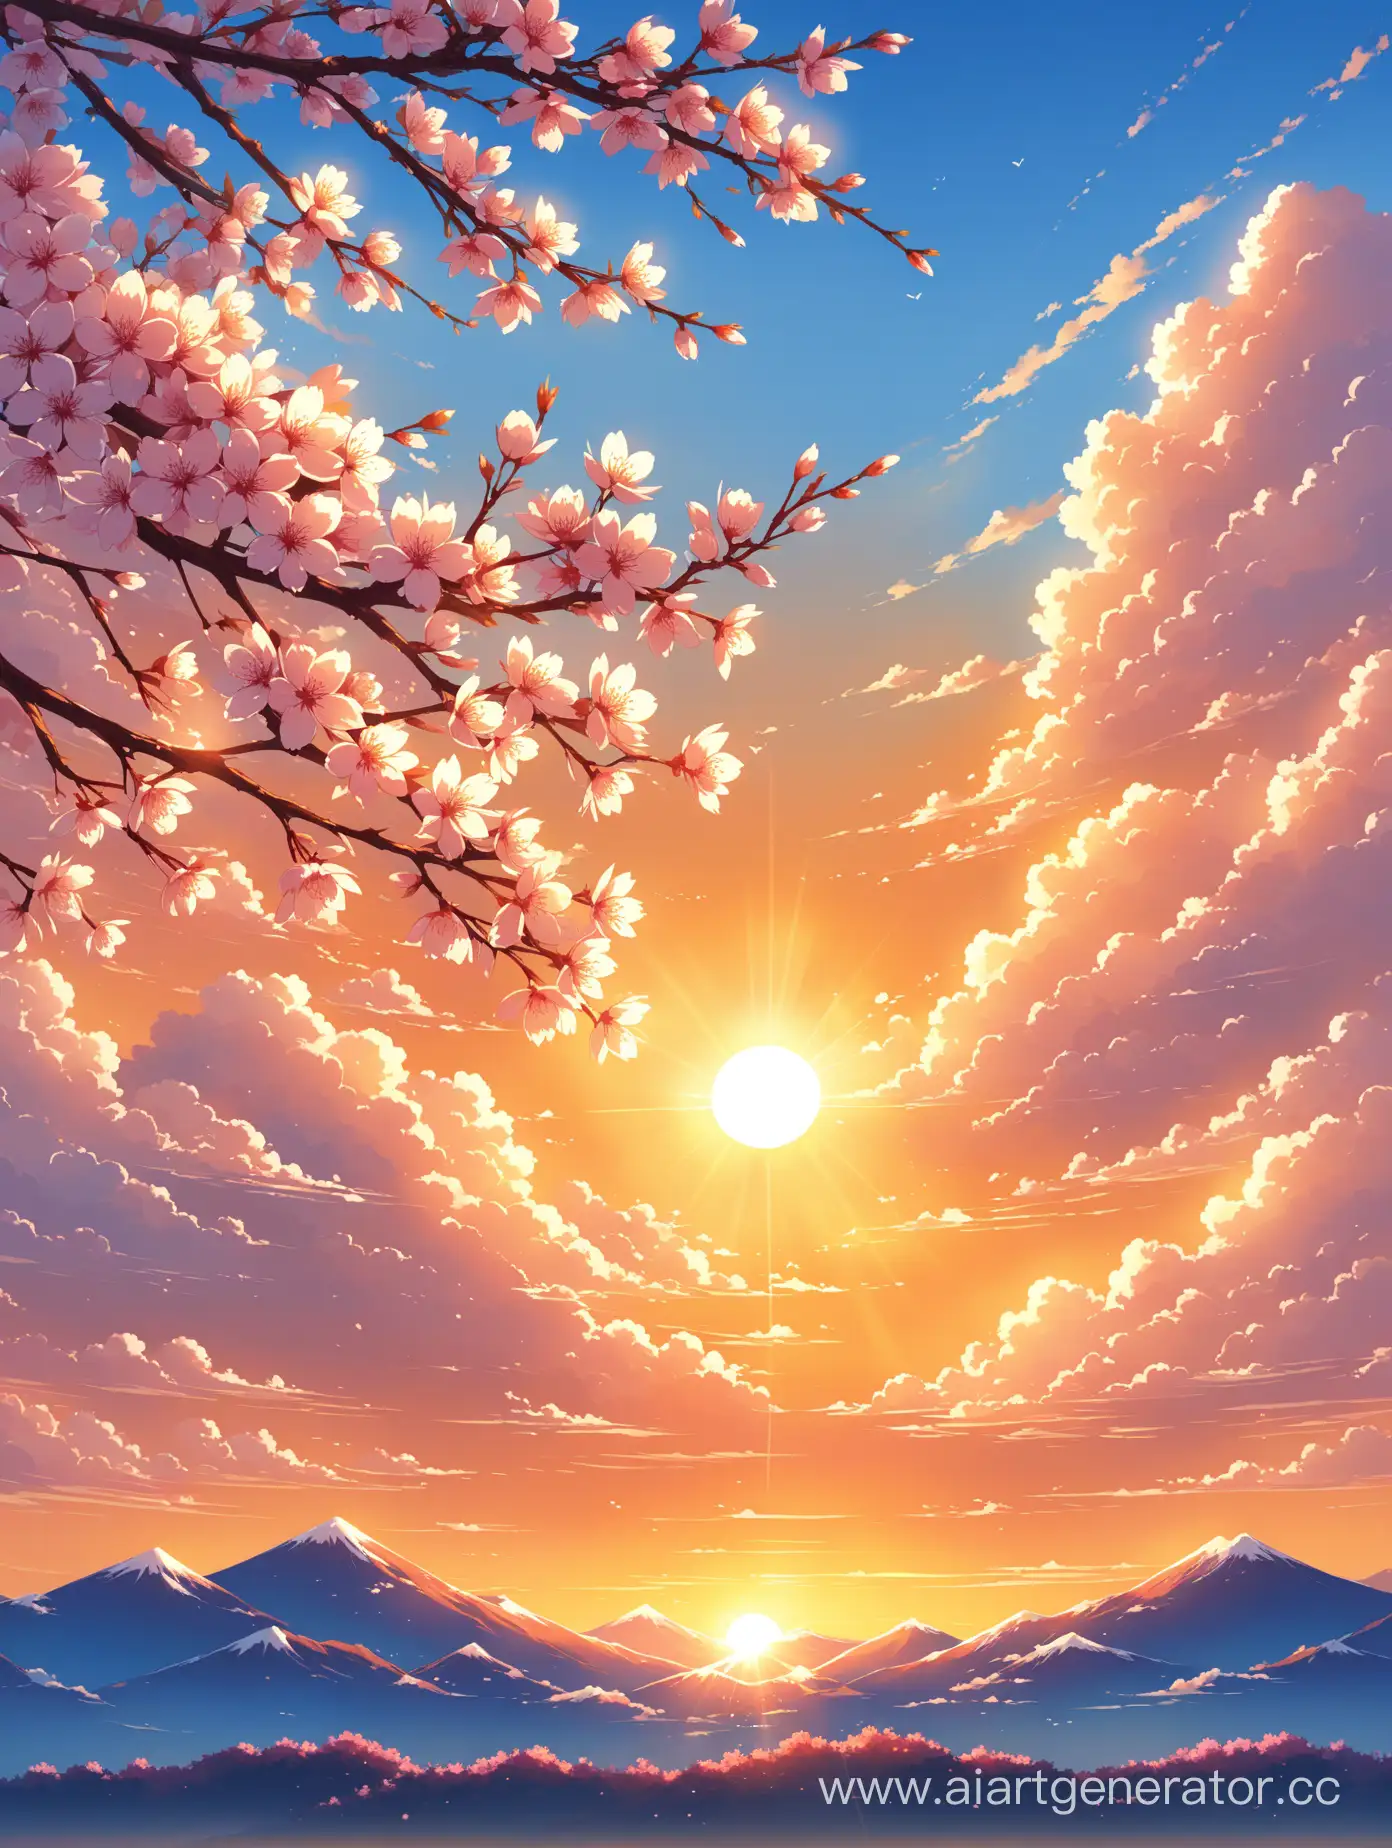 Sunset-Serenity-with-Cherry-Blossoms